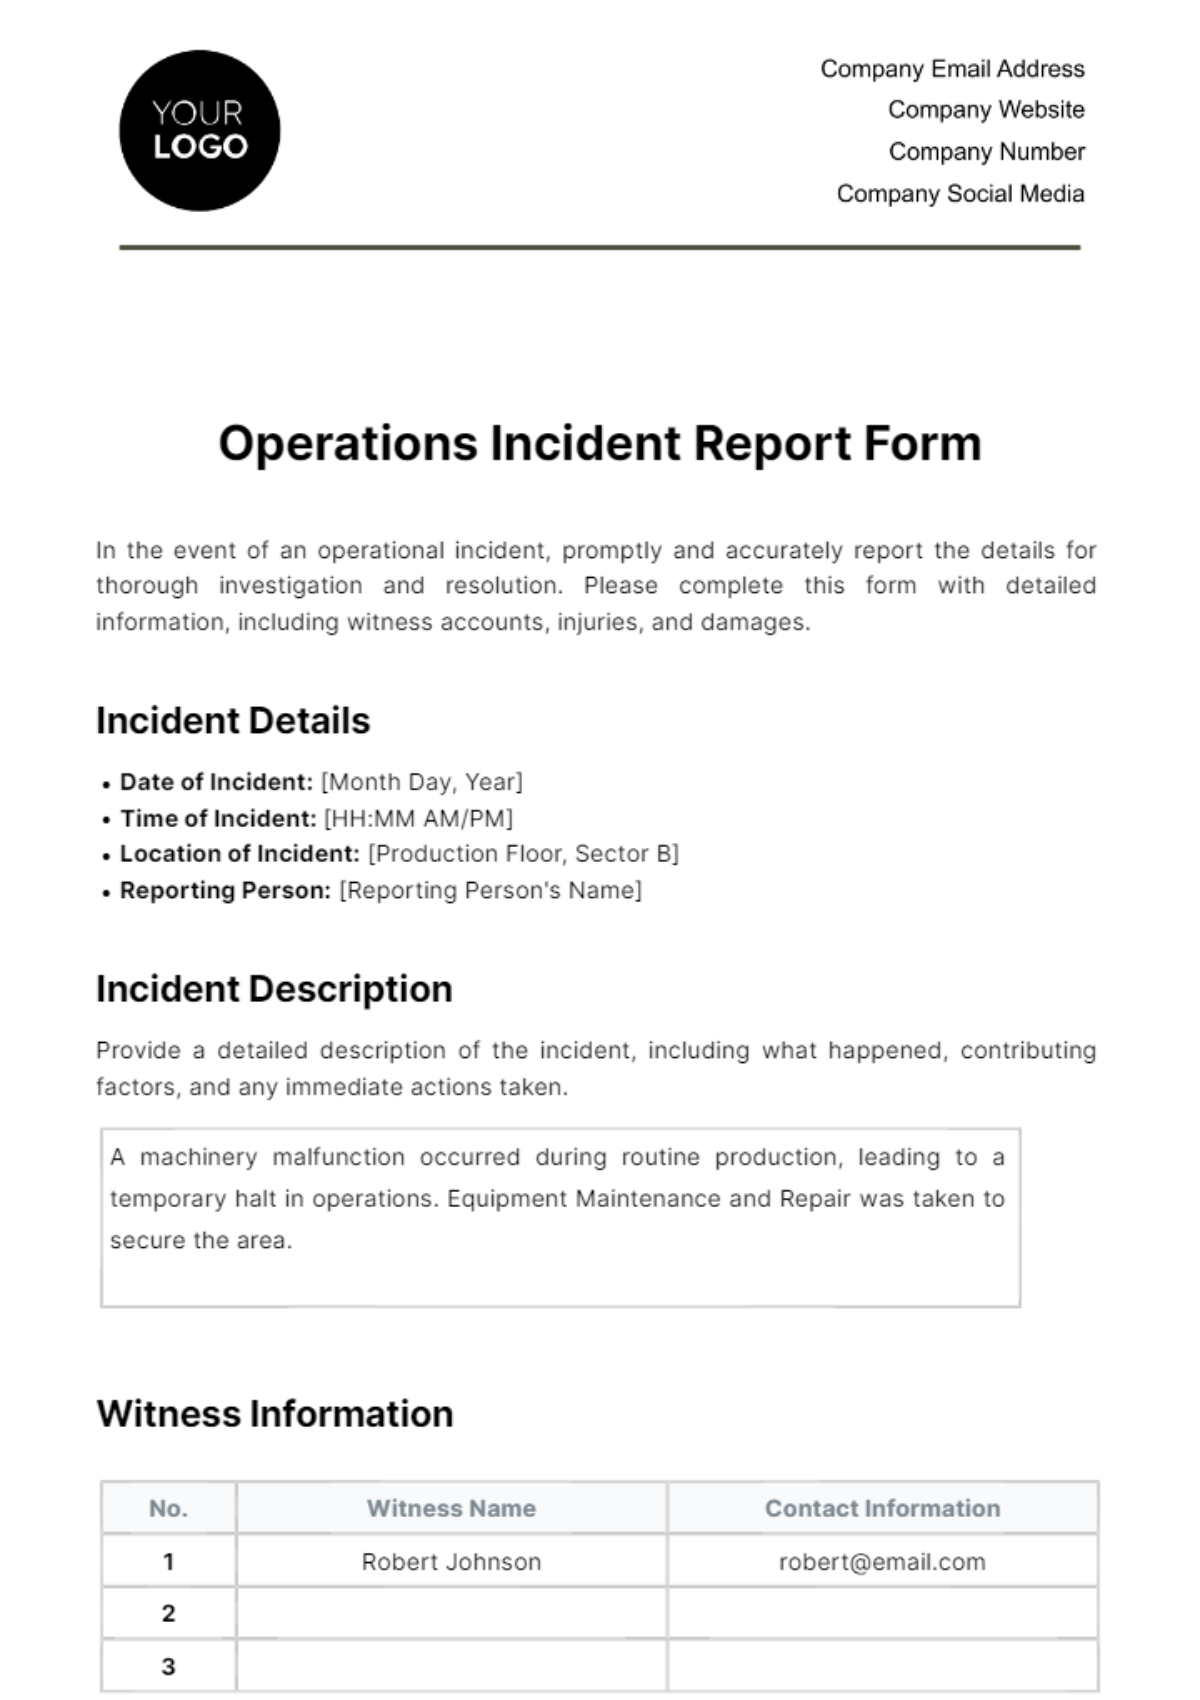 Operations Incident Report Form Template